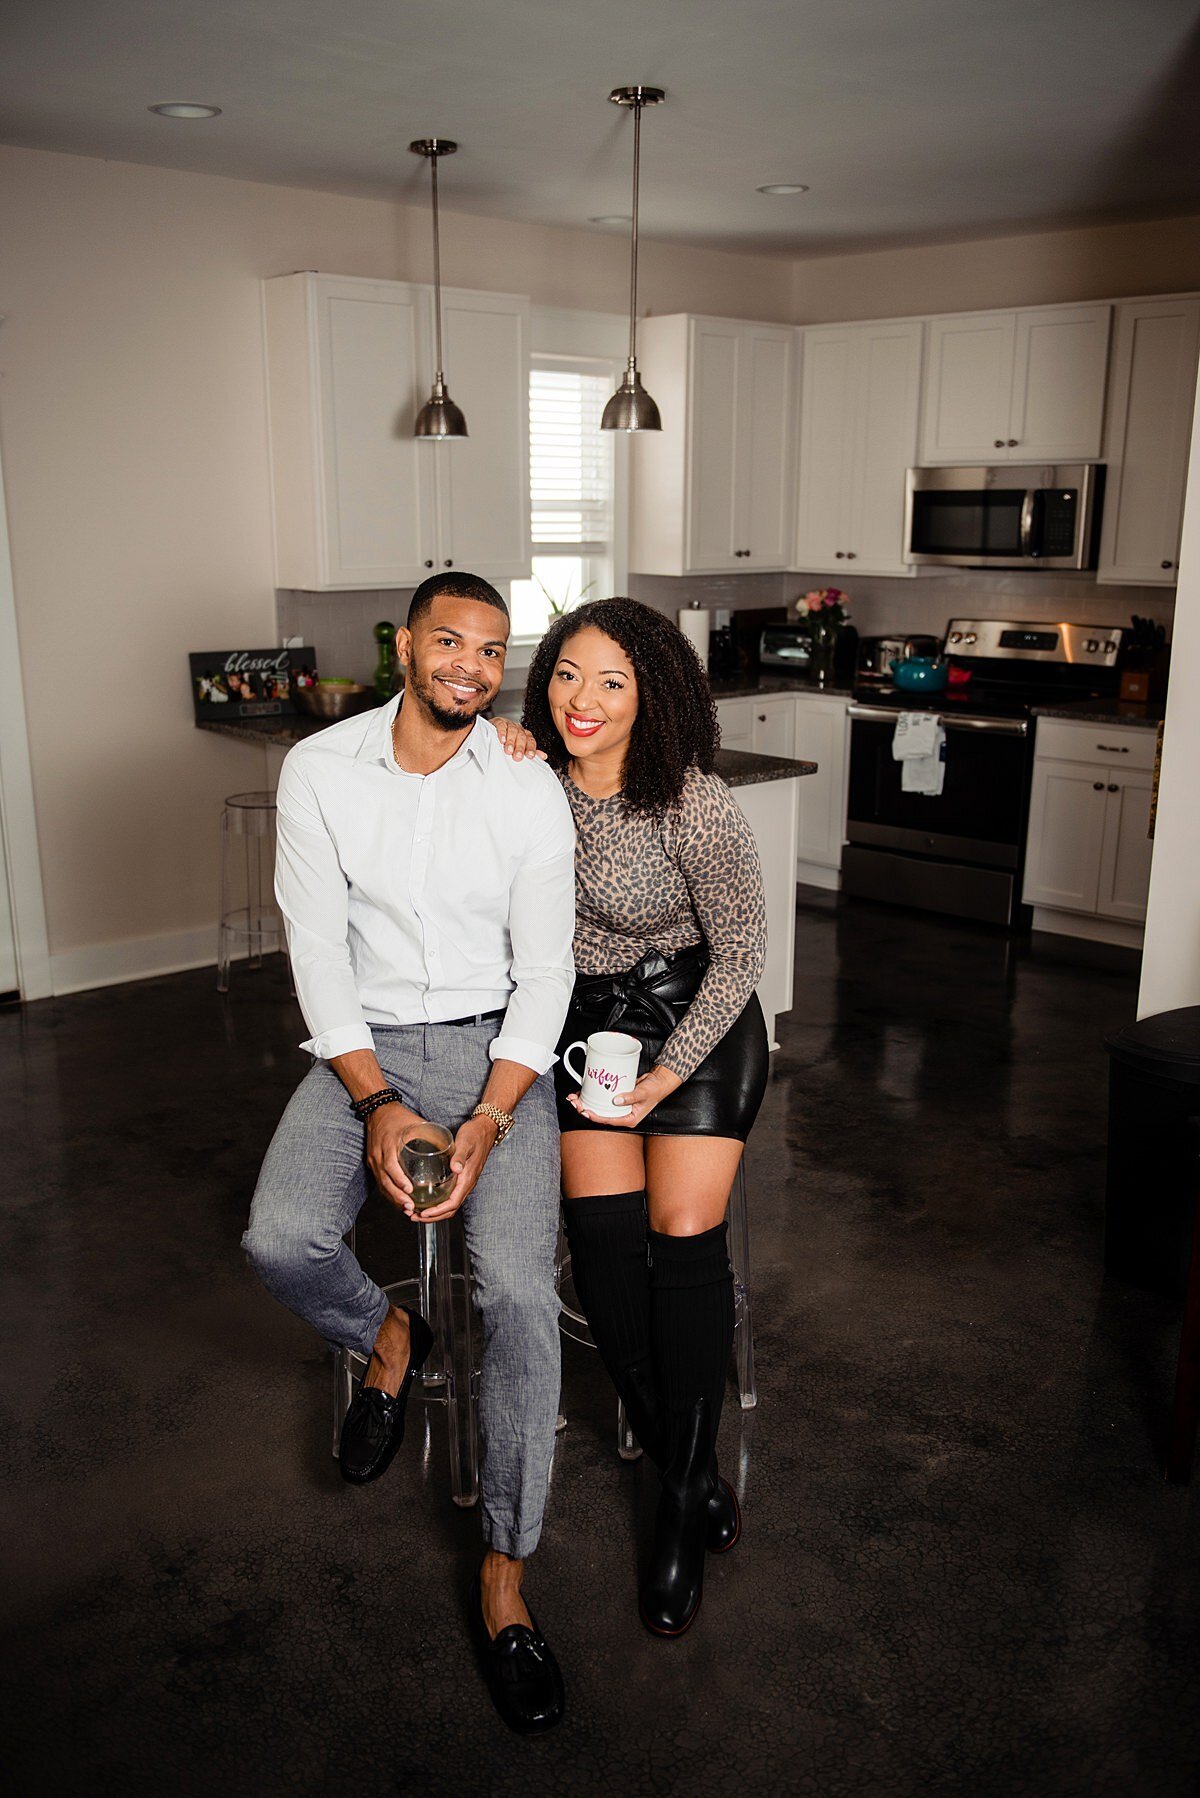 Indoor photoshoot in couples new home in East Nashville, newlyweds smiling at camera in their new kitchen